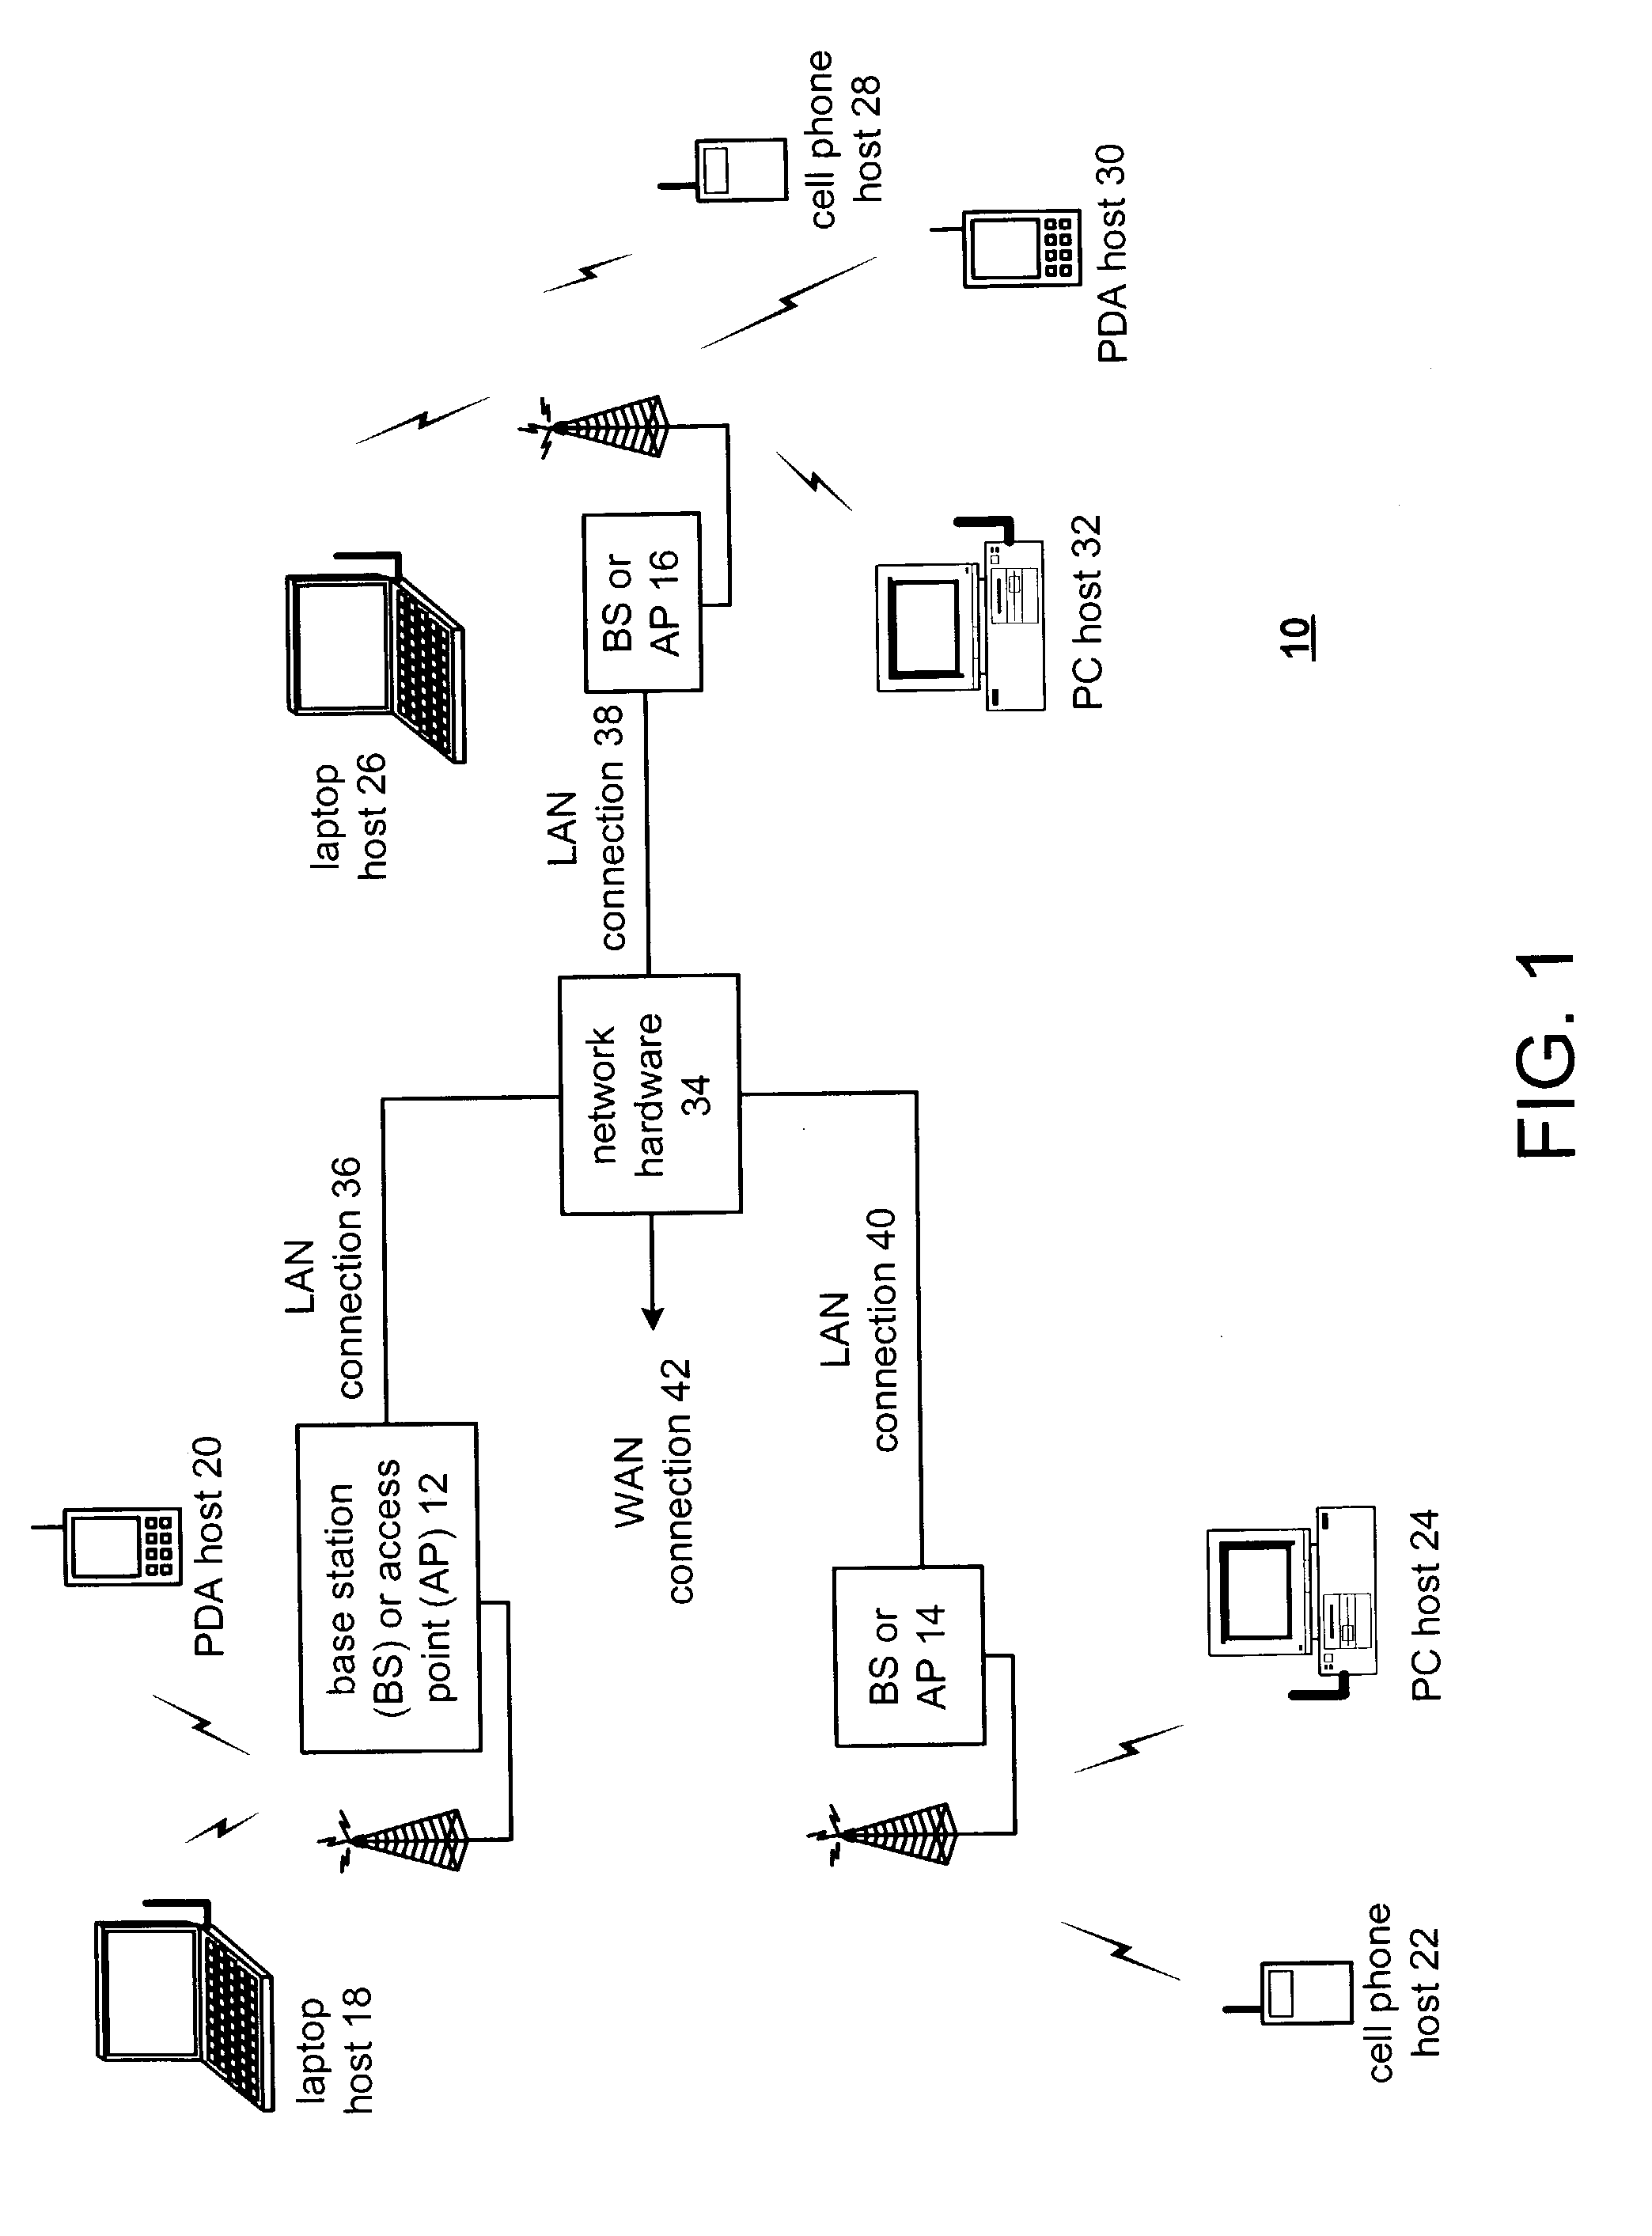 Direct conversion RF transceiver with automatic transmit power control